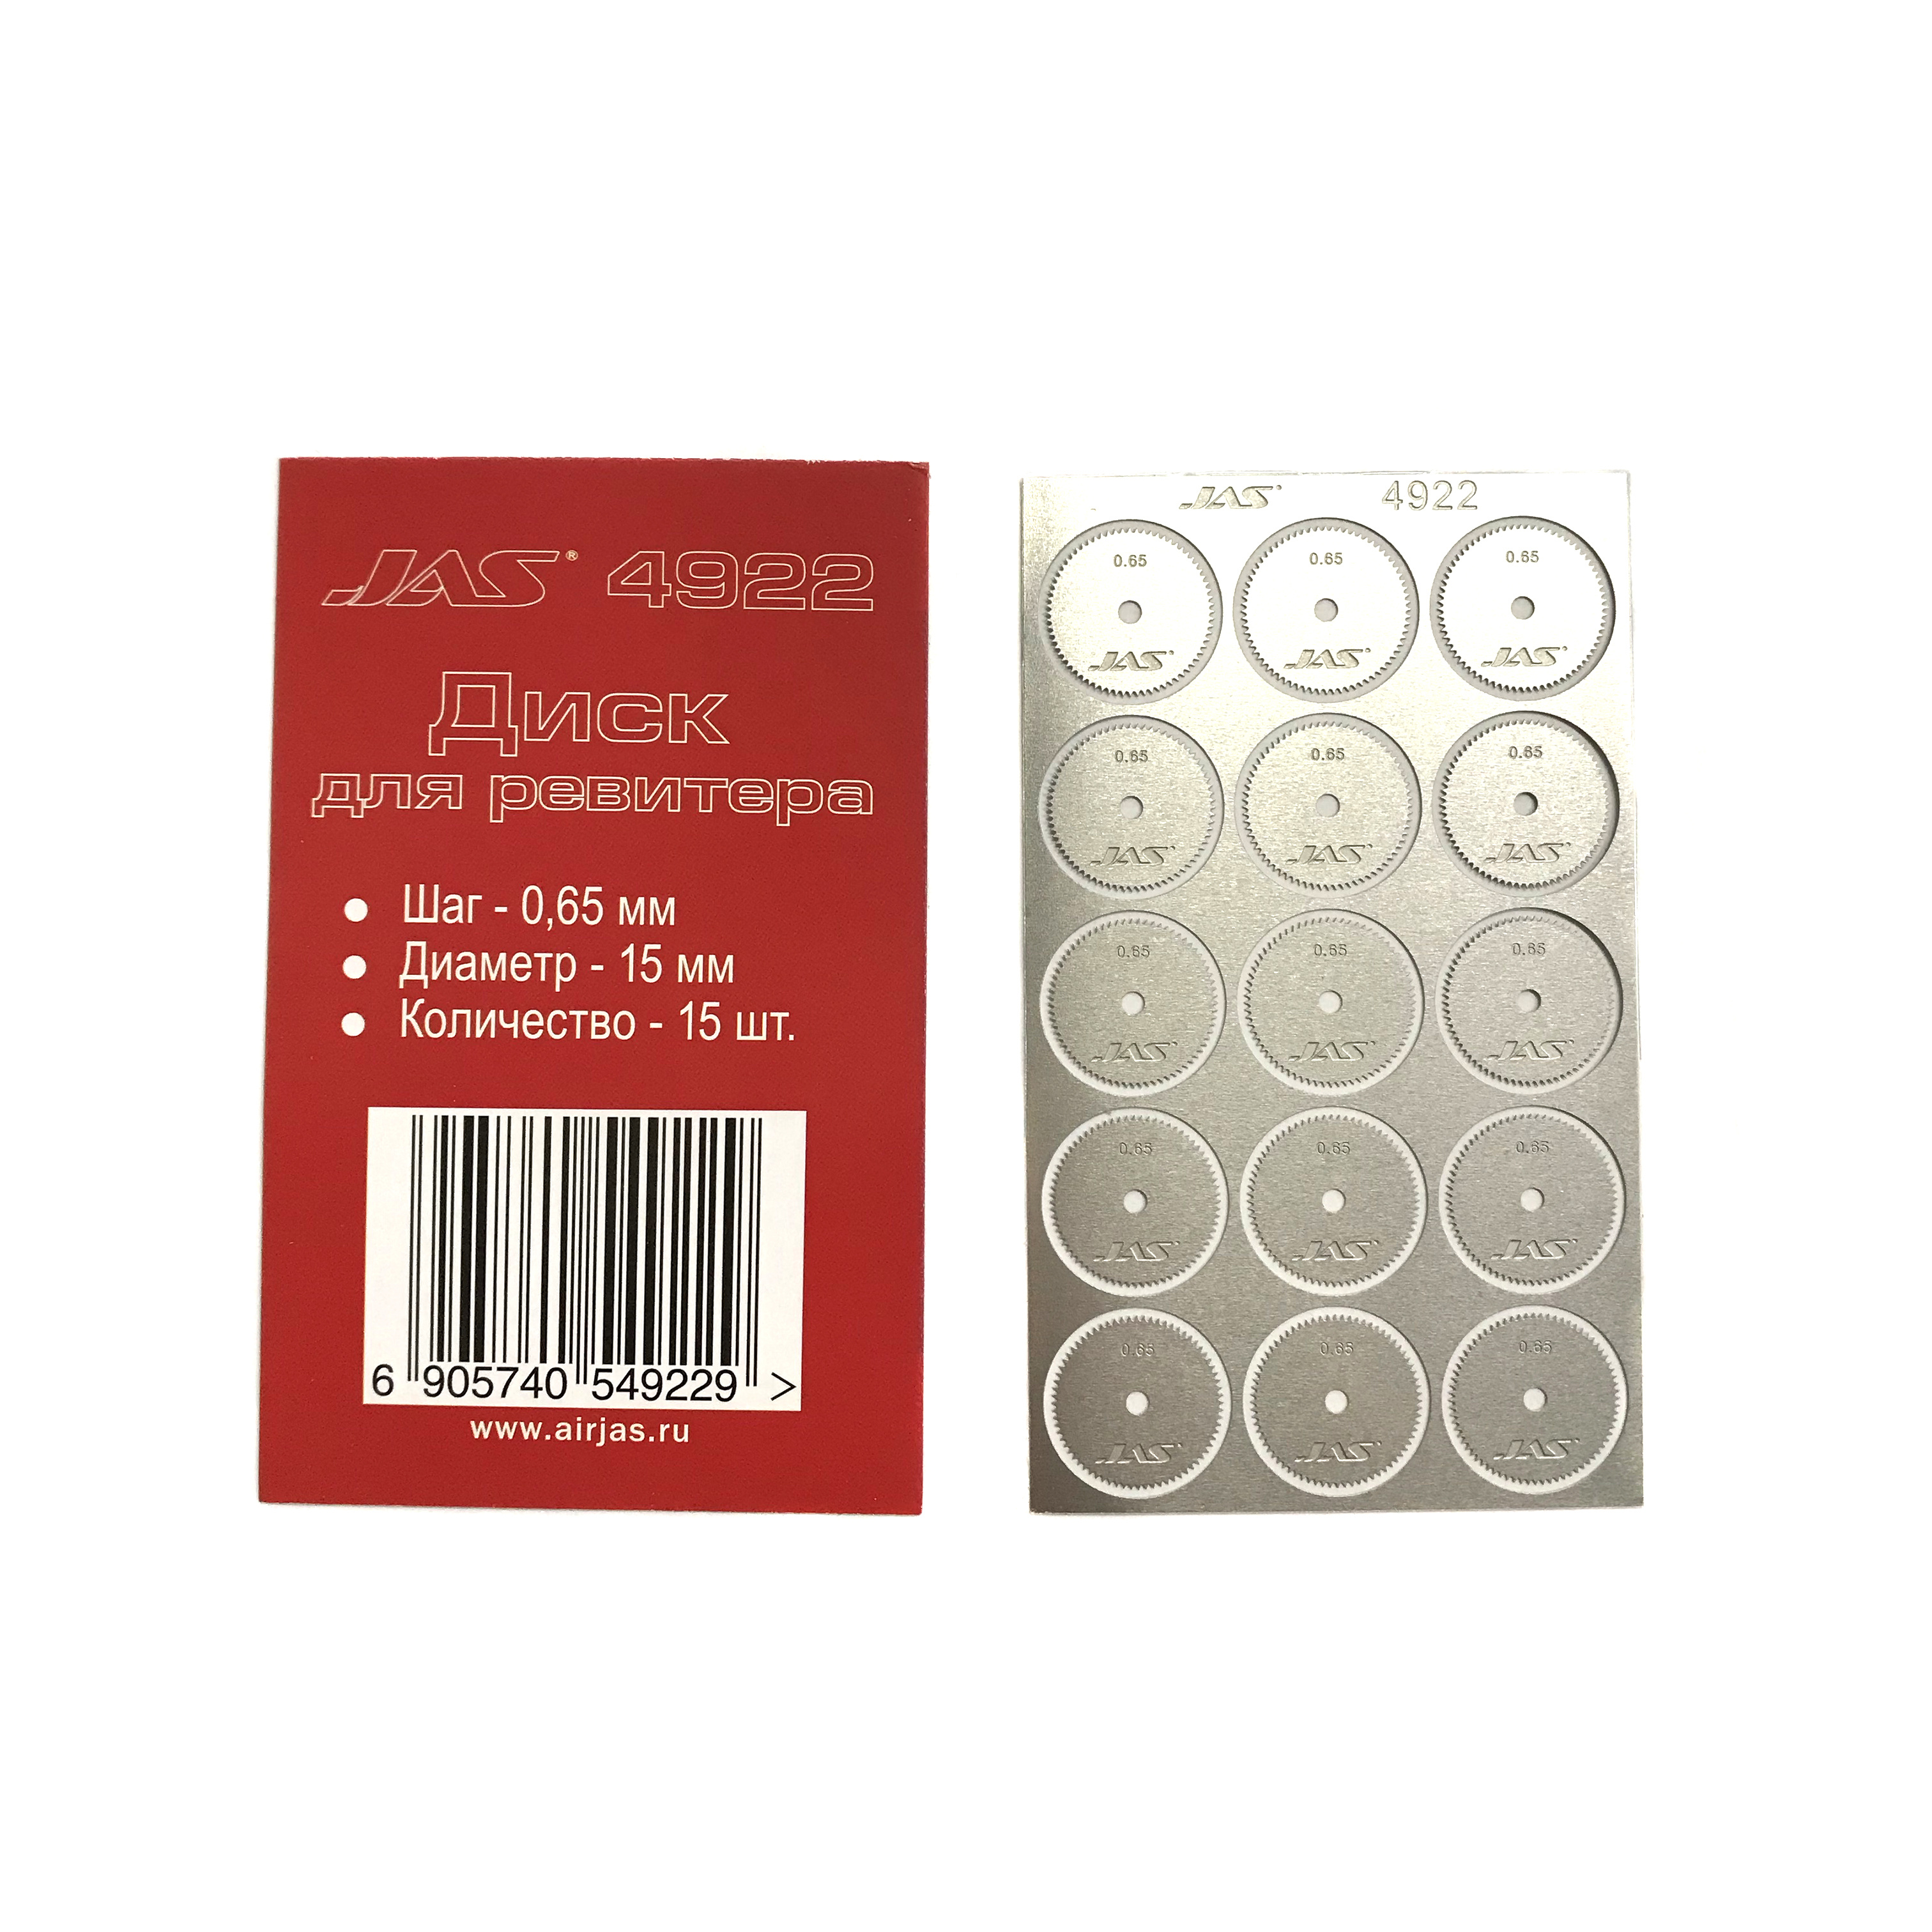 4922 JAS Disc for reviter d 15 mm, pitch 0.65 mm, 15 pieces.